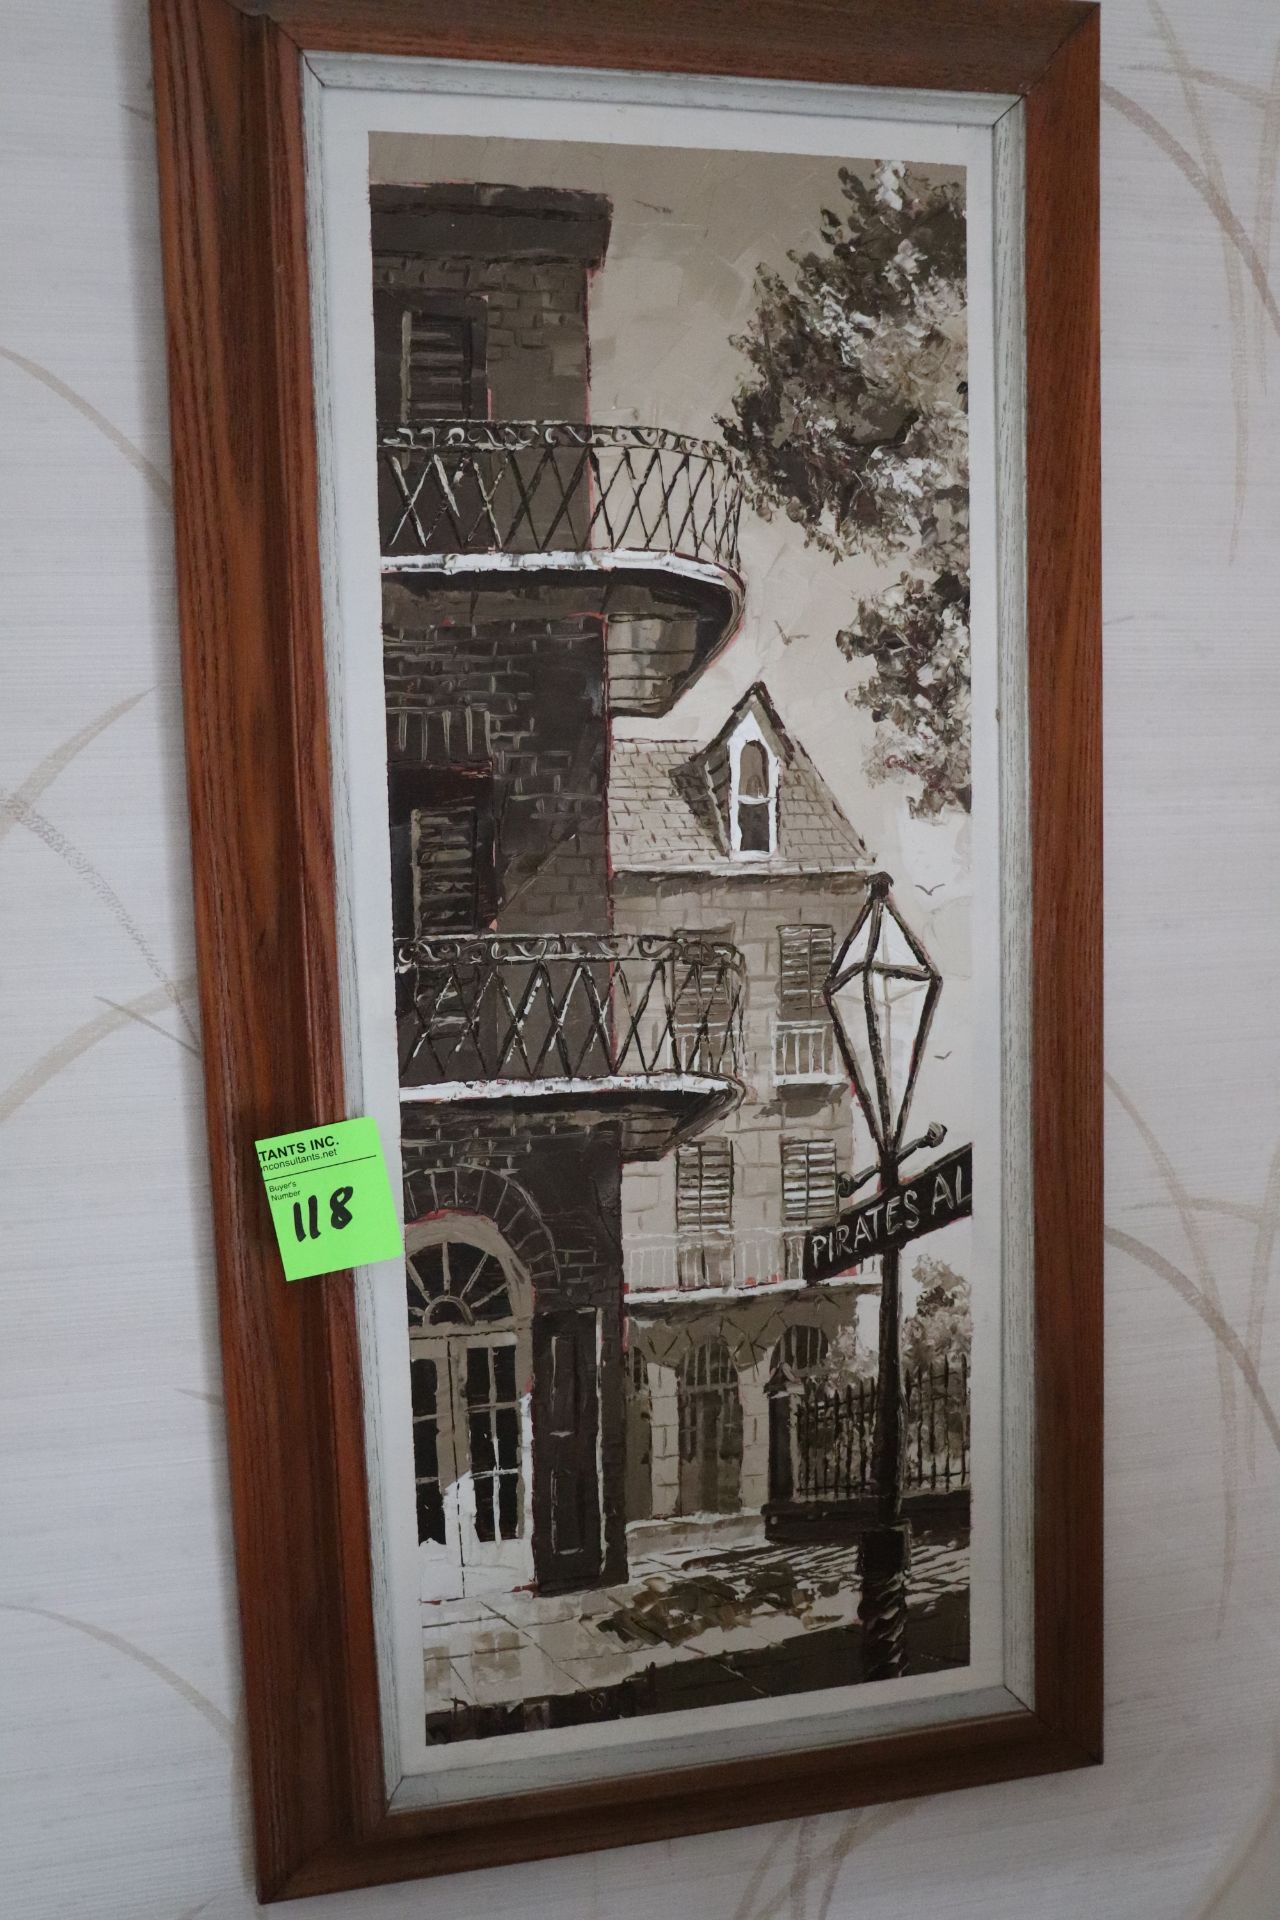 Framed painting of a New Orleans town scene